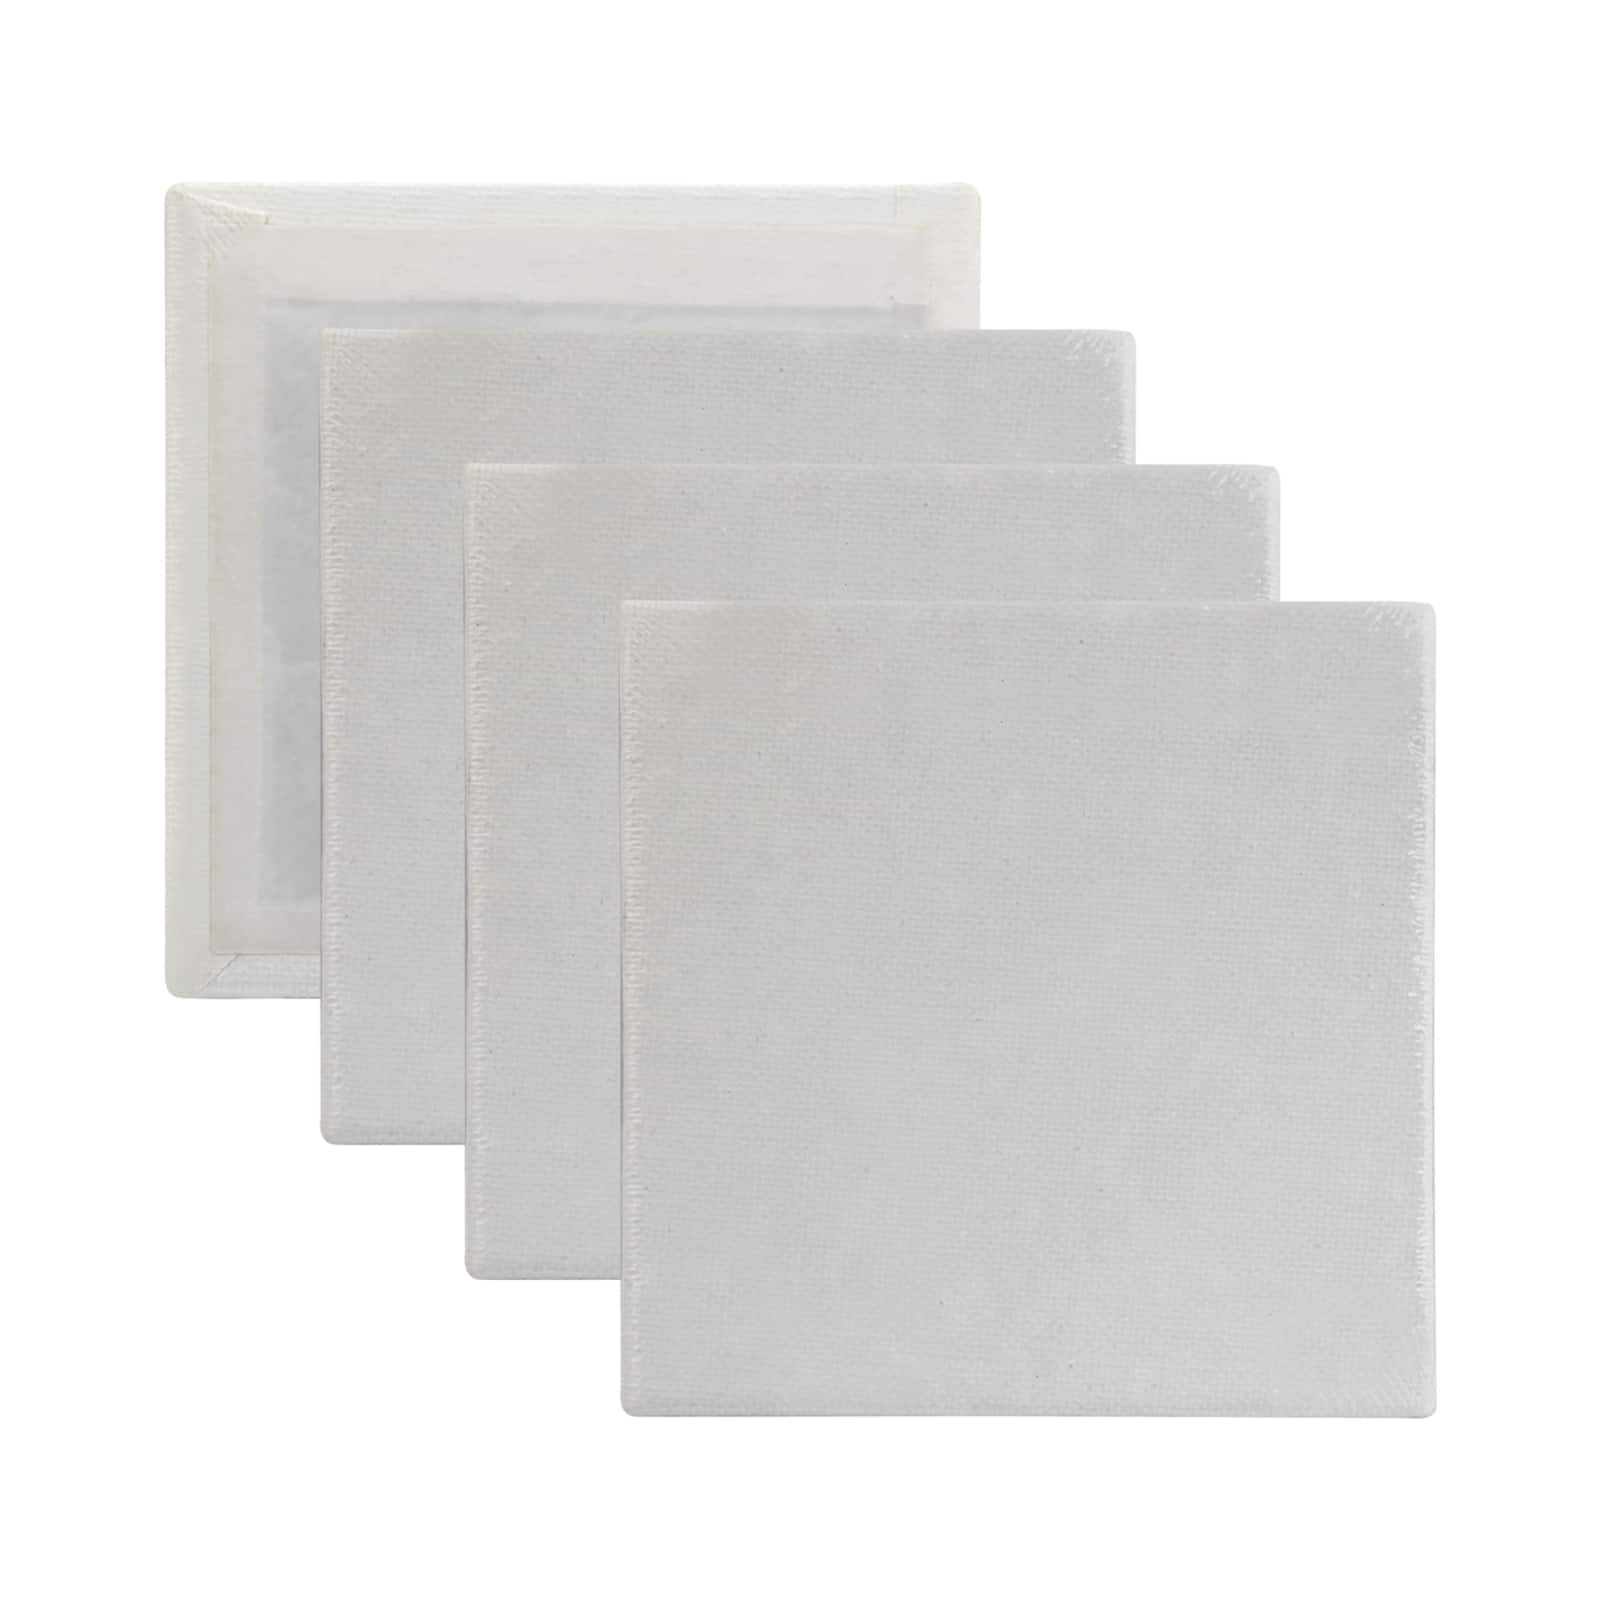 SL crafts Black Mini Stretched Canvas 4x4 Inch (1 Pack of 6 Mini Canvases)